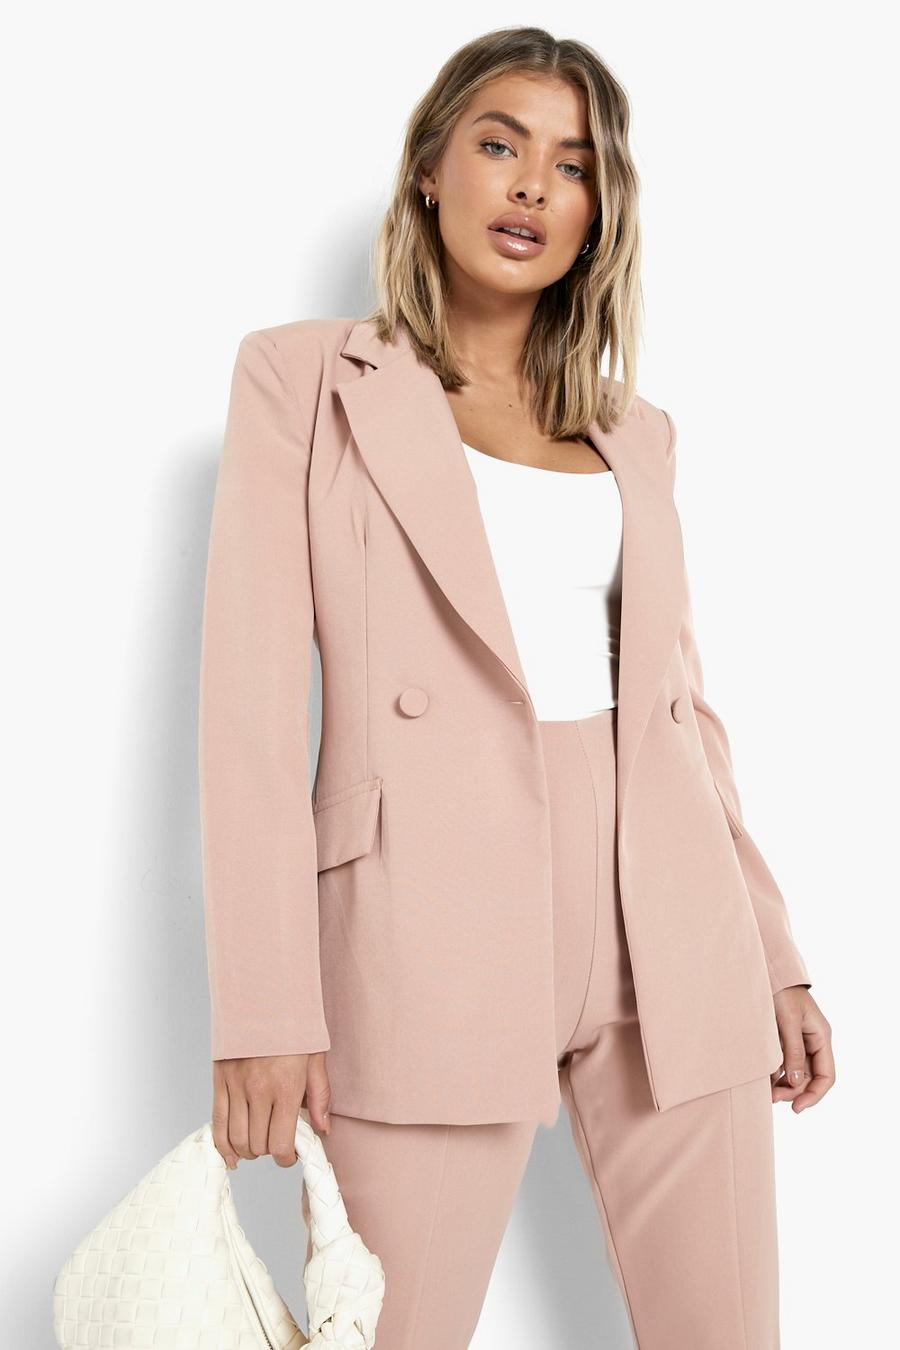 Women's Trouser Suits For Special Occasions